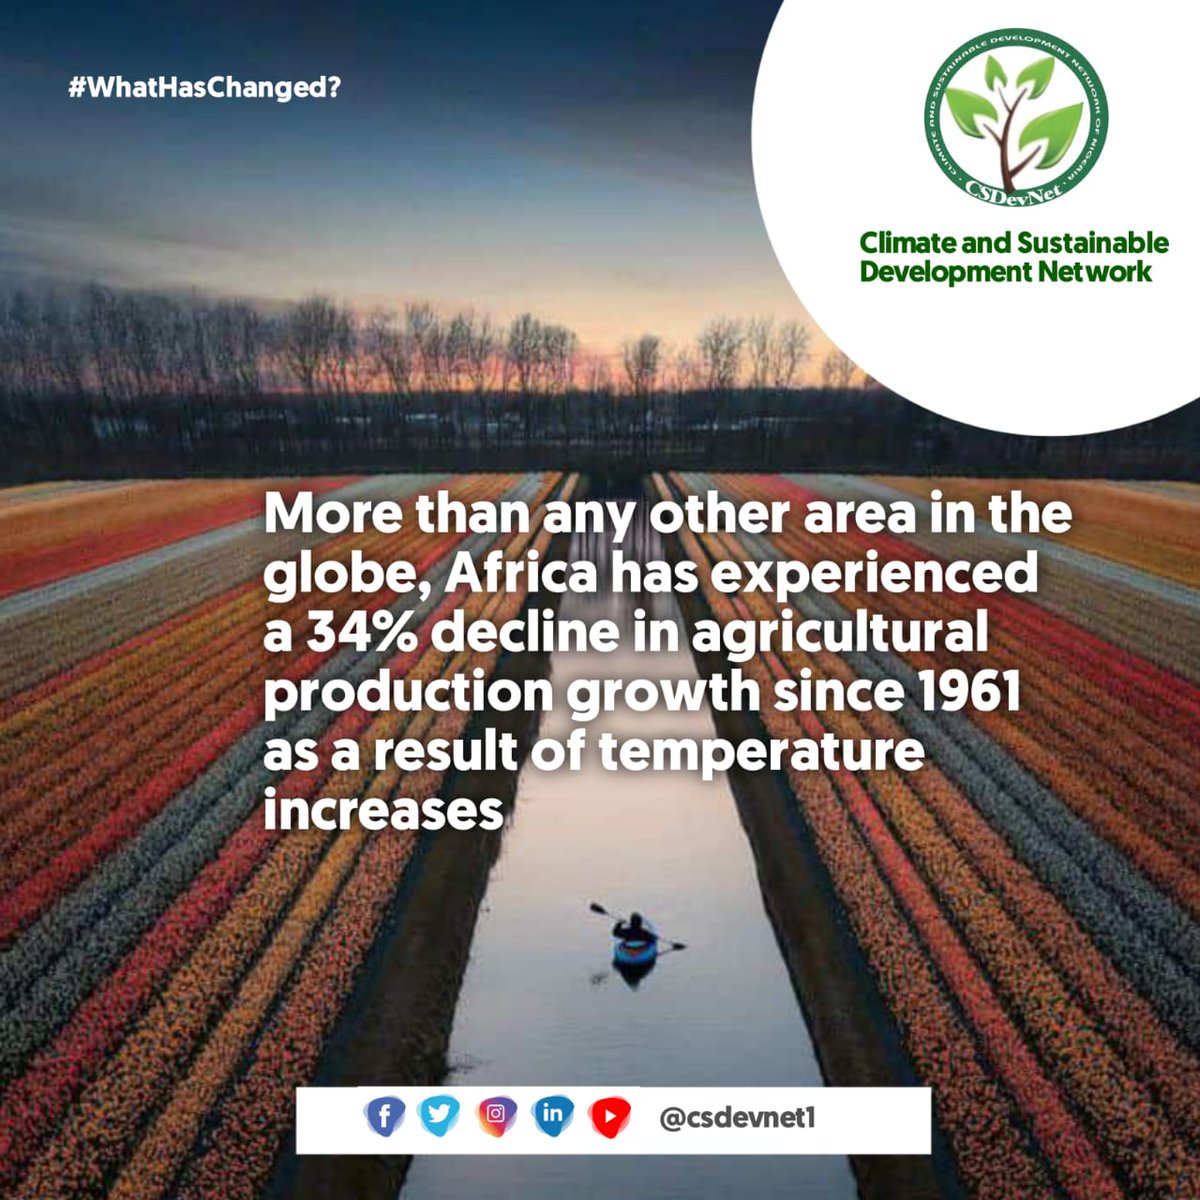 #WhatHasChanged?
#AgriculturalAdaptation